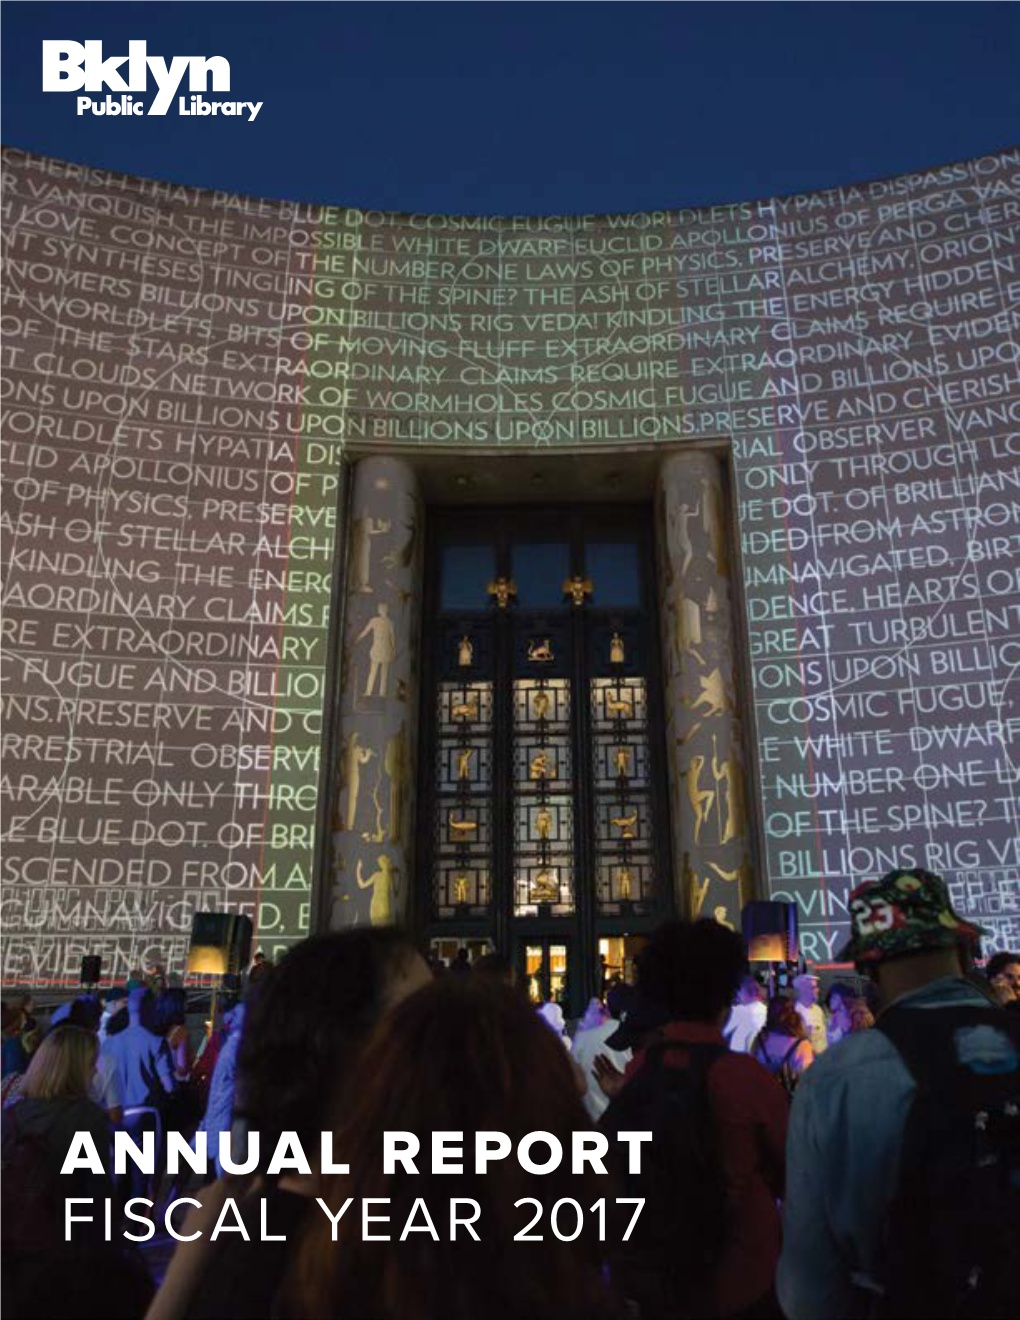 Annual Report Fiscal Year 2017 Brooklyn Public Library